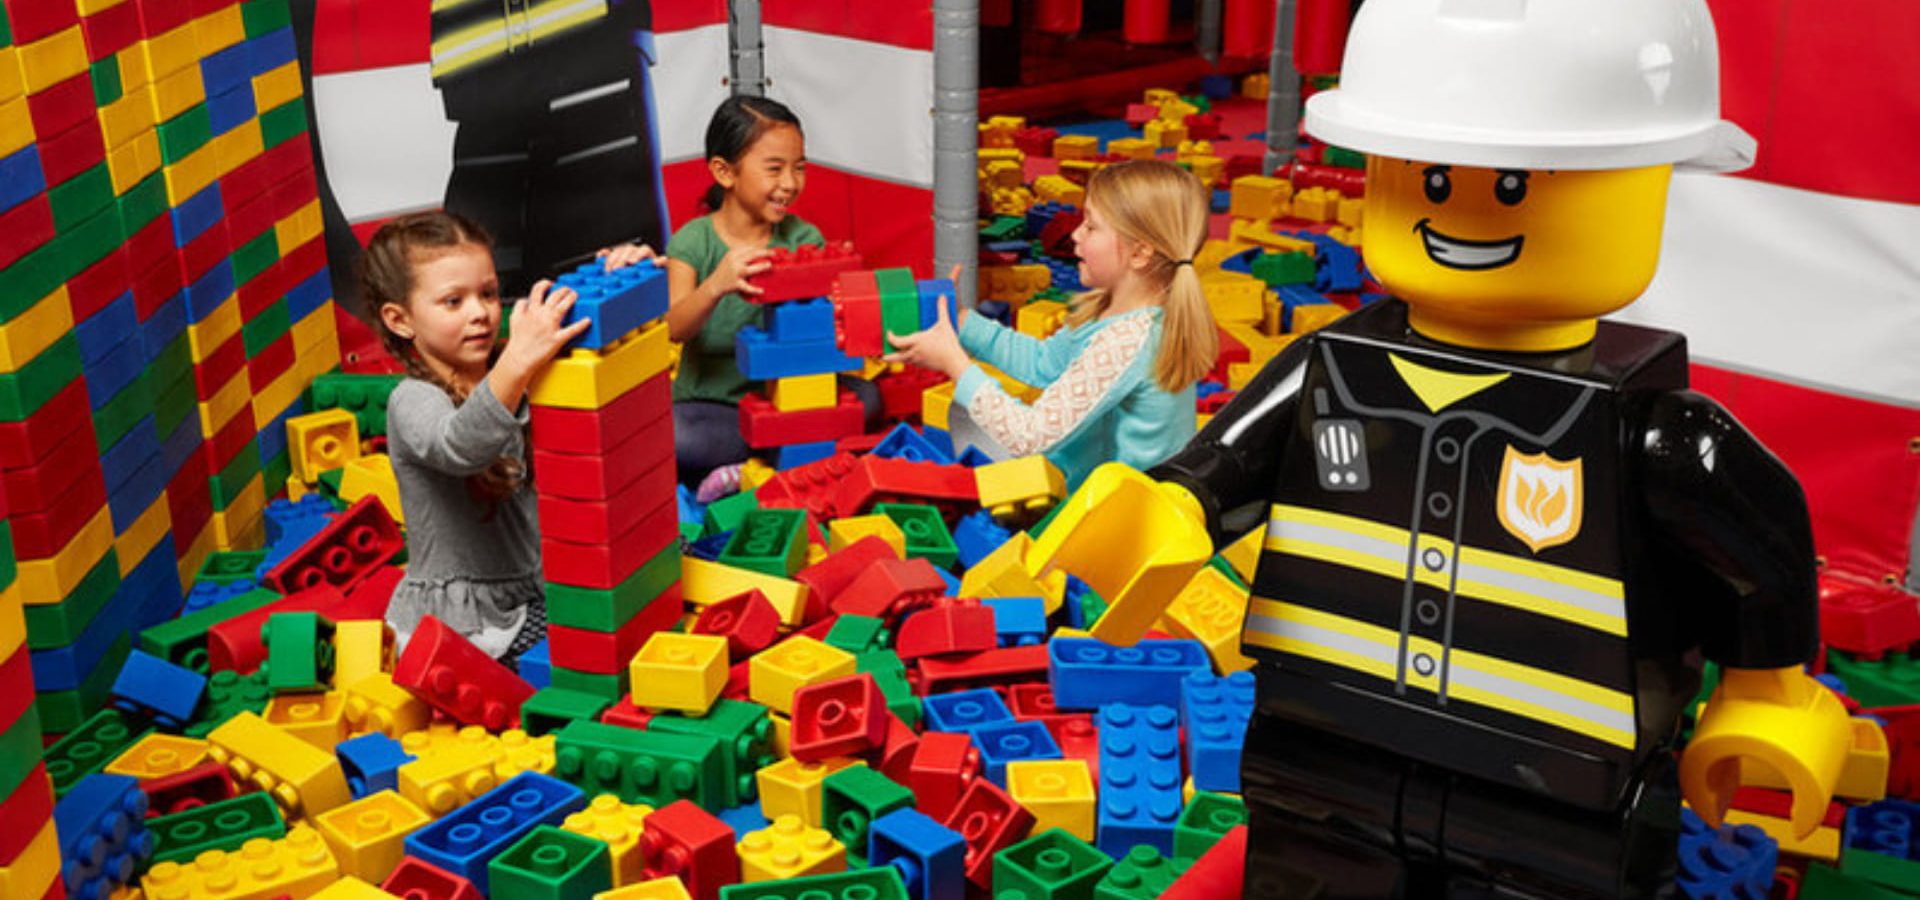 Group of children playing at LEGOLAND Discovery Centre in Birmingham.